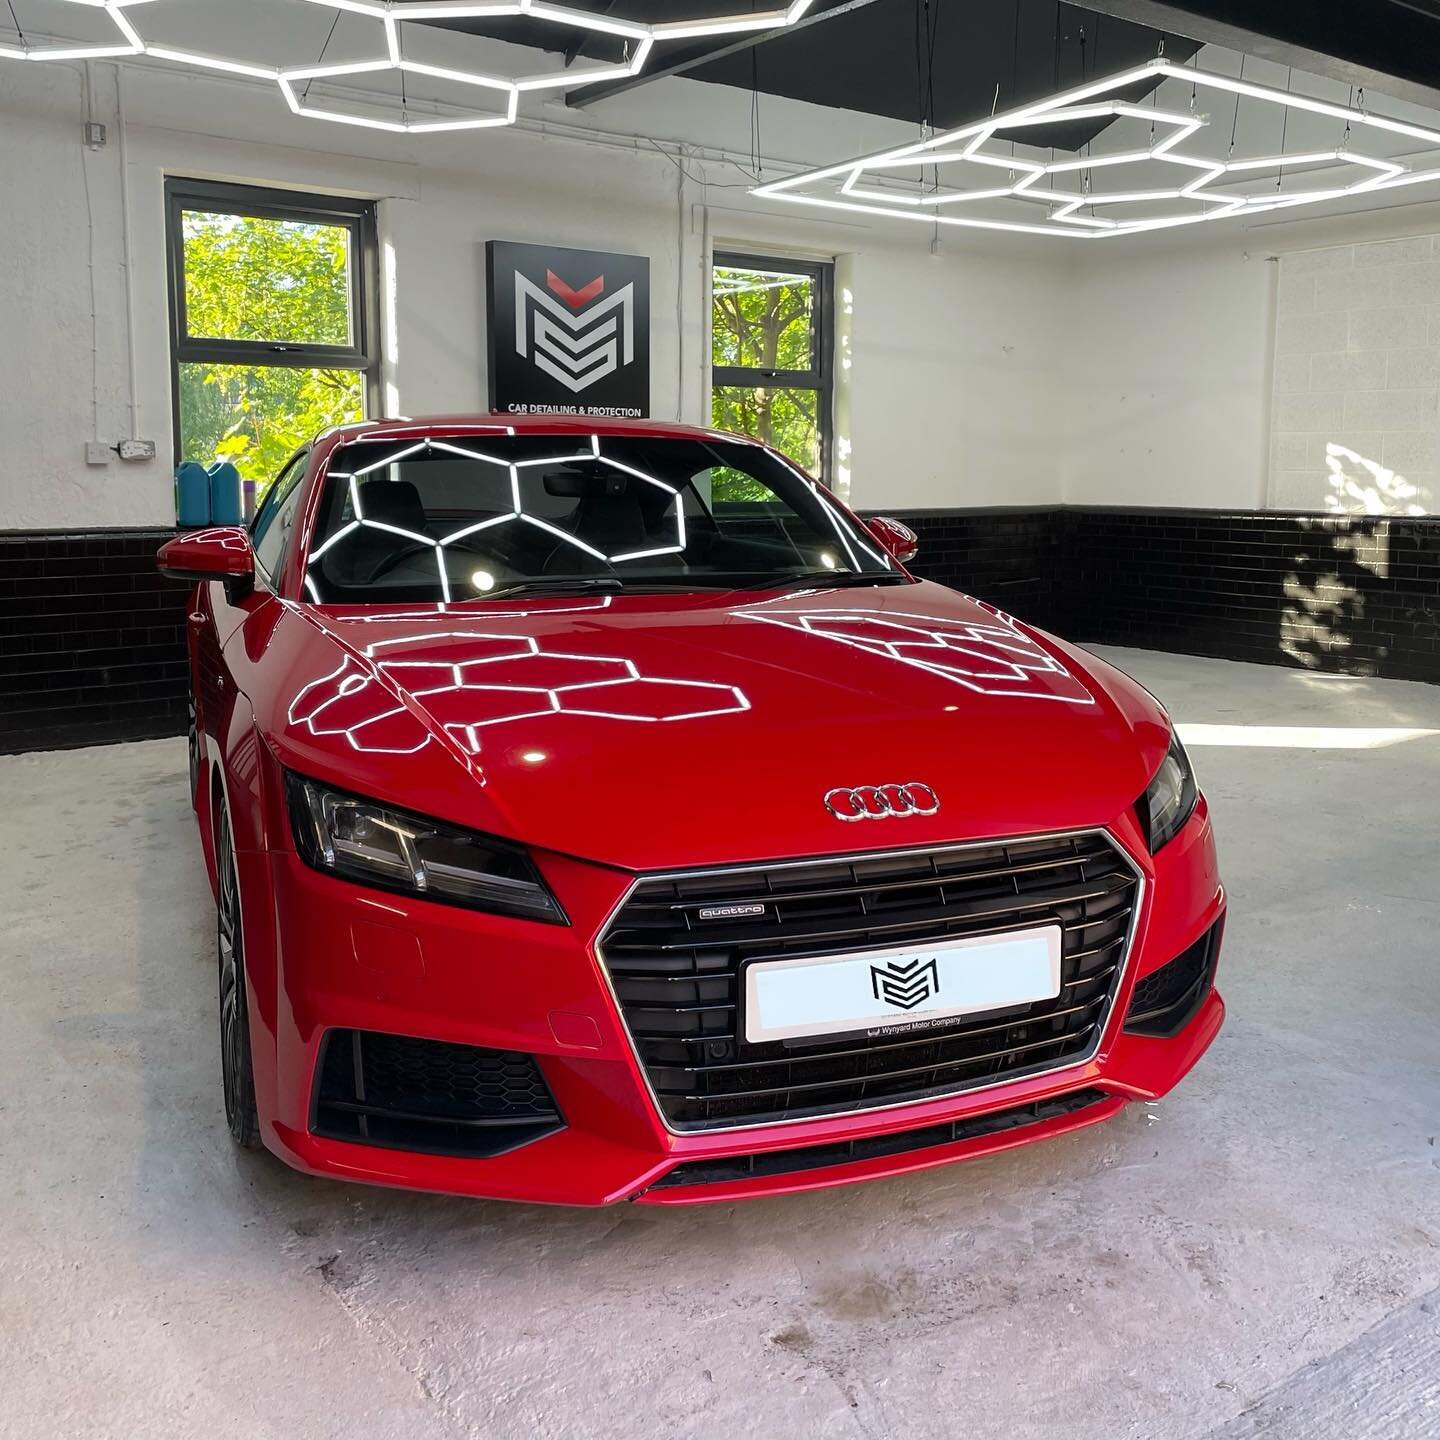 ✨MSDETAILINGUK✨
Audi TT In for our detail services, We make your car stand out from others!!!!
___________
➡️SWIPE➡️
__________________
Facebook- msdetailinguk
Snapchat- msdetailinguk 
__________________
For more info and booking DM US 📥